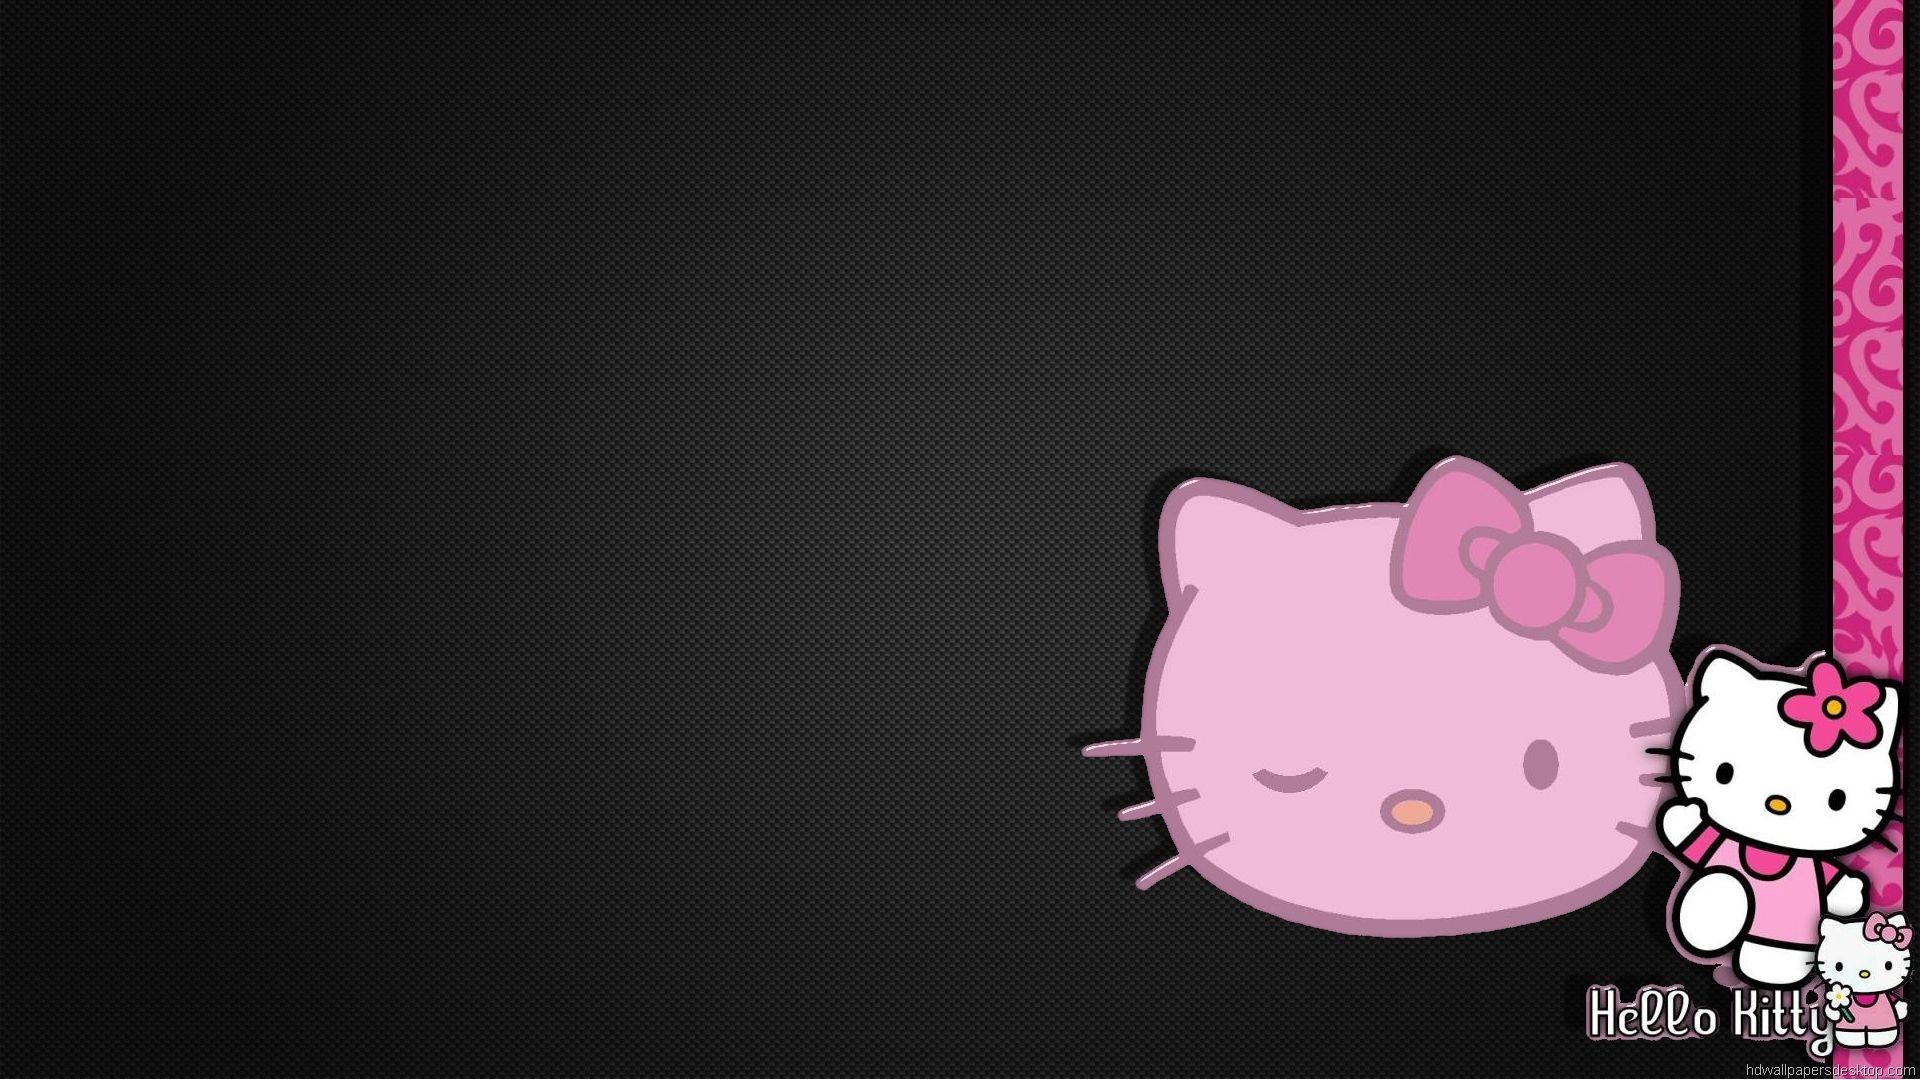 Hello Kitty Background 46 88182 High Definition Wallpaper. wallalay